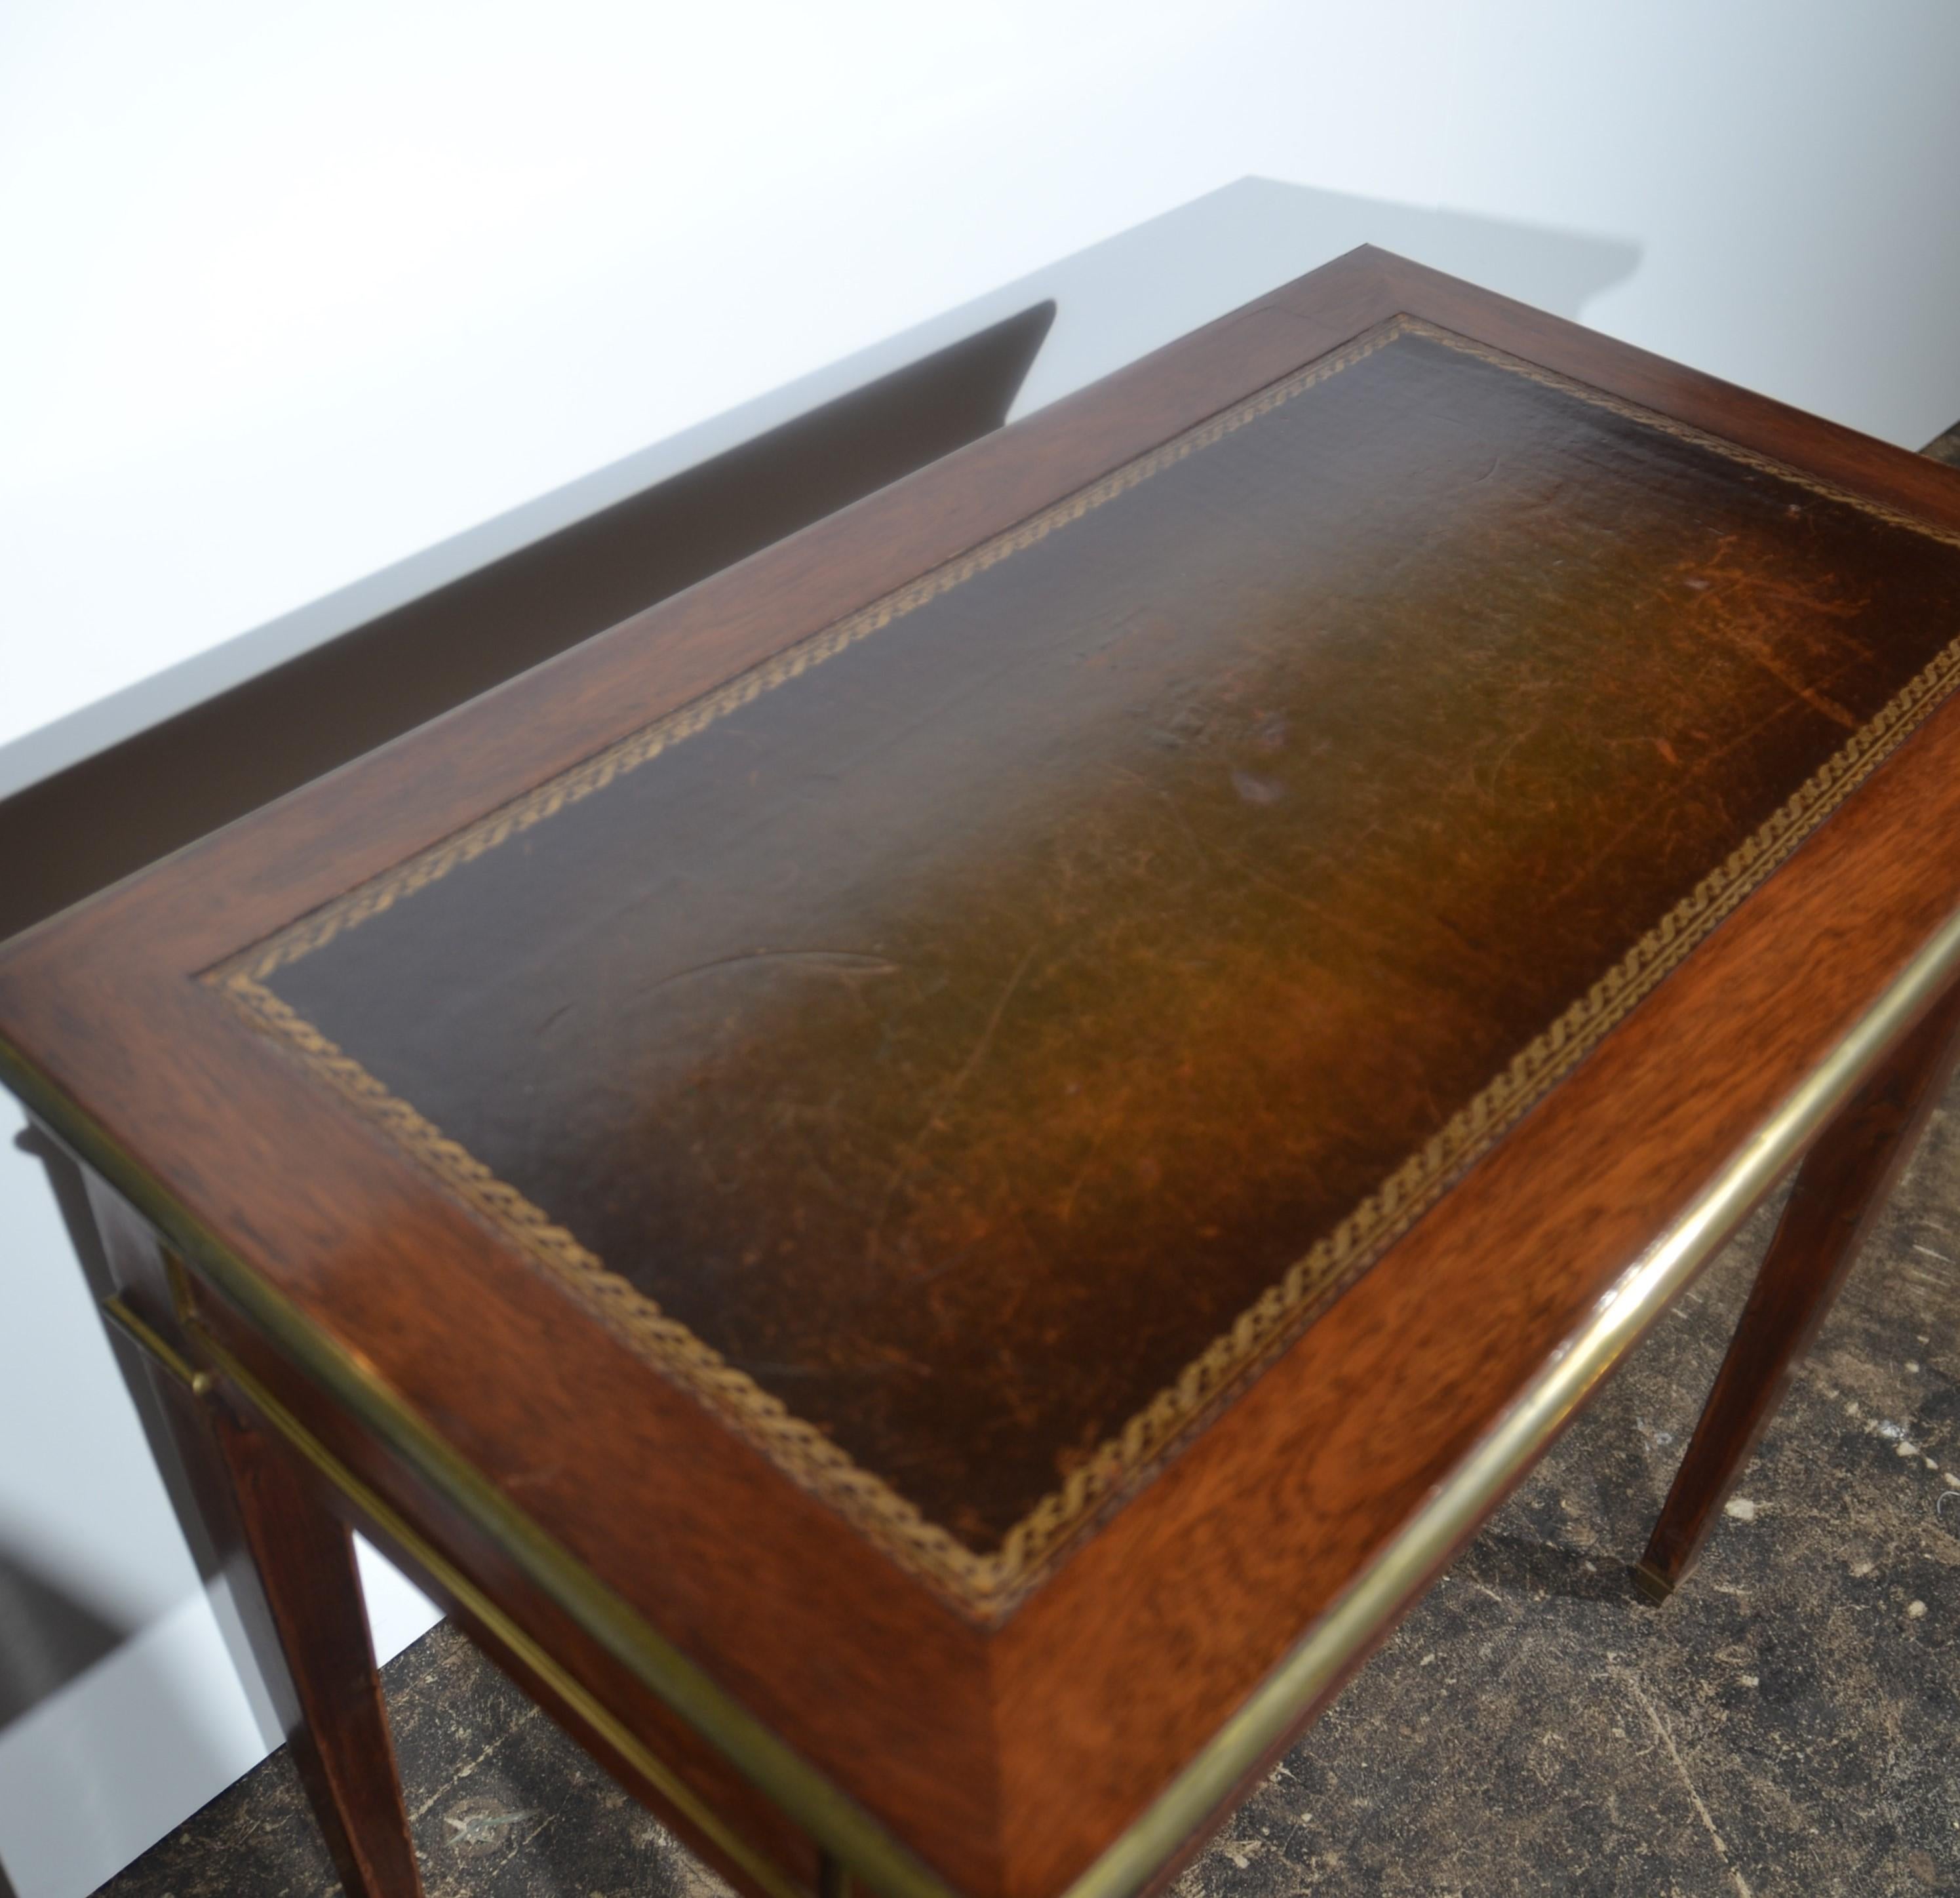 A French mahogany Louis XVI neoclassical desk / table with single oak lined drawer. Brass edging trim throughout. Leather writing surface with gold tooling. c.1880.